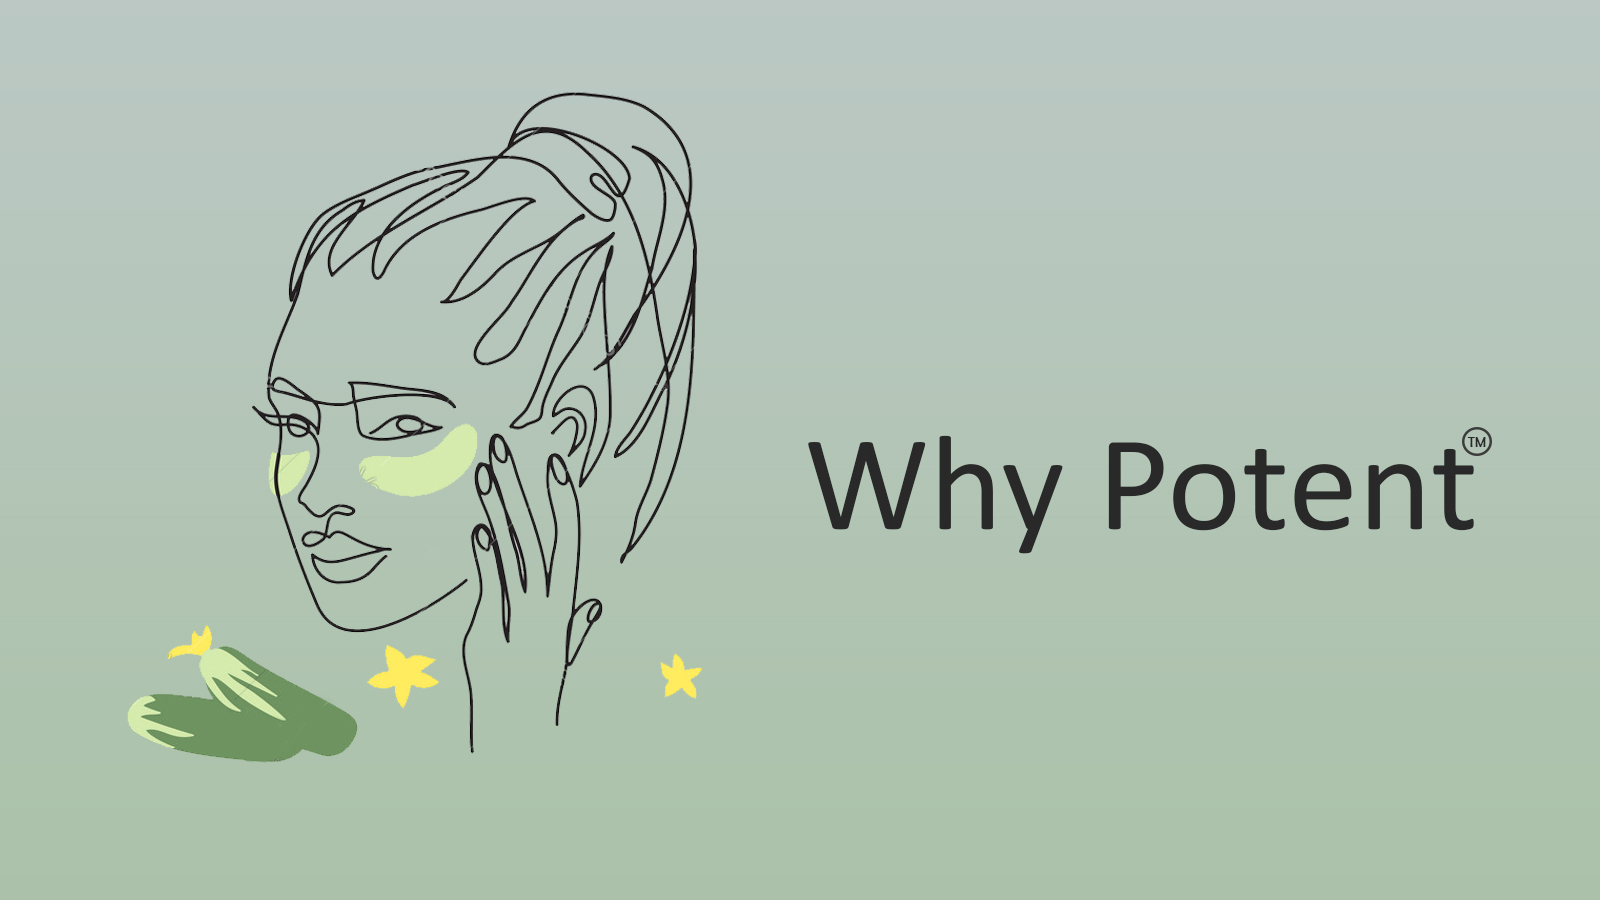 Why Potent